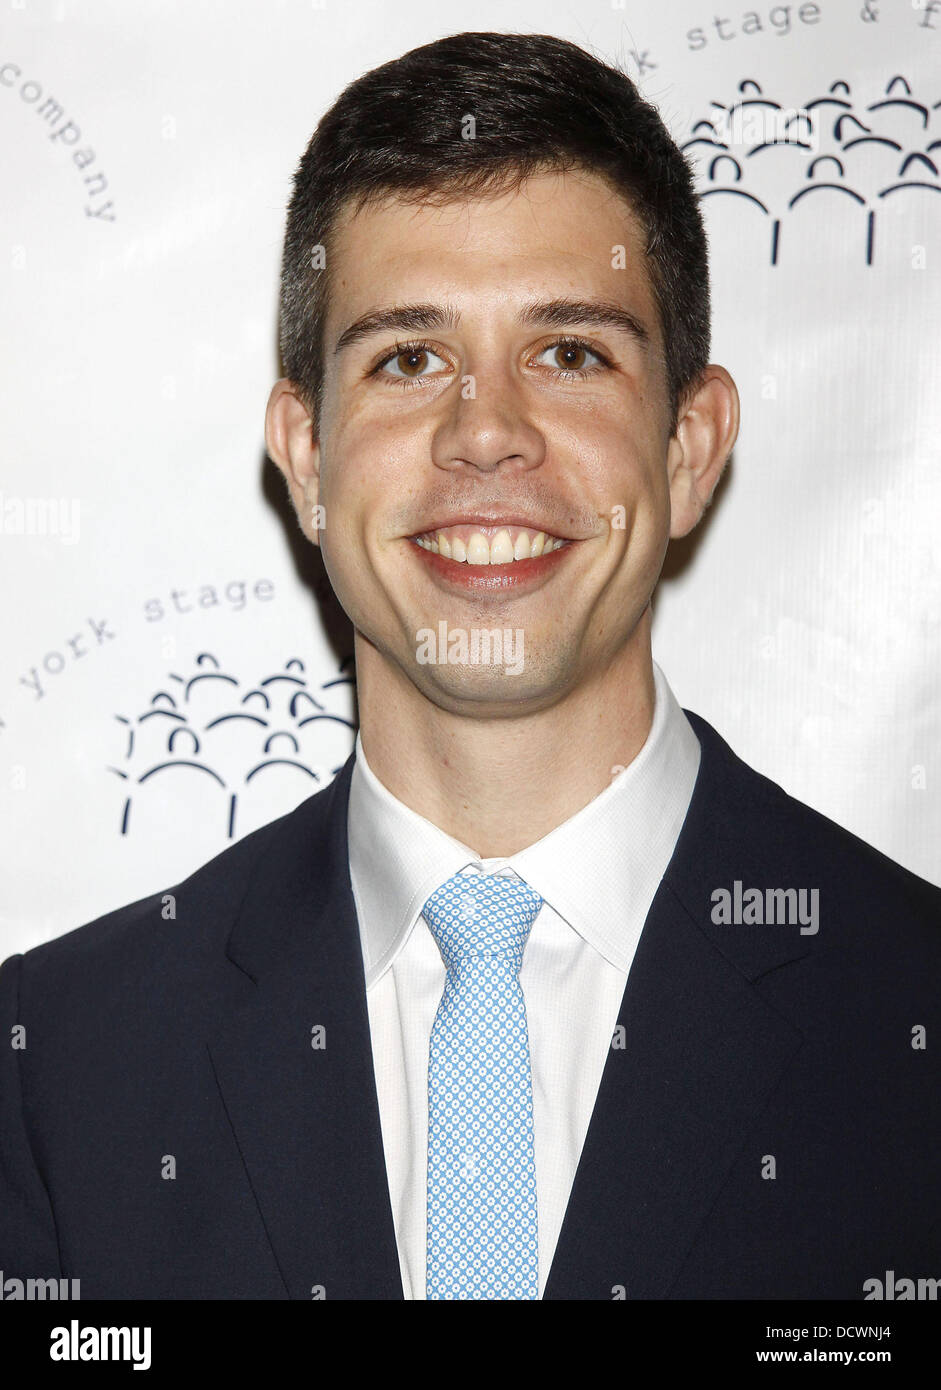 Stephen Karam    The 2011 New York Stage and Film Winter Gala held at The Plaza Hotel - Arrivals.    New York City, USA - 04.12.11 Stock Photo